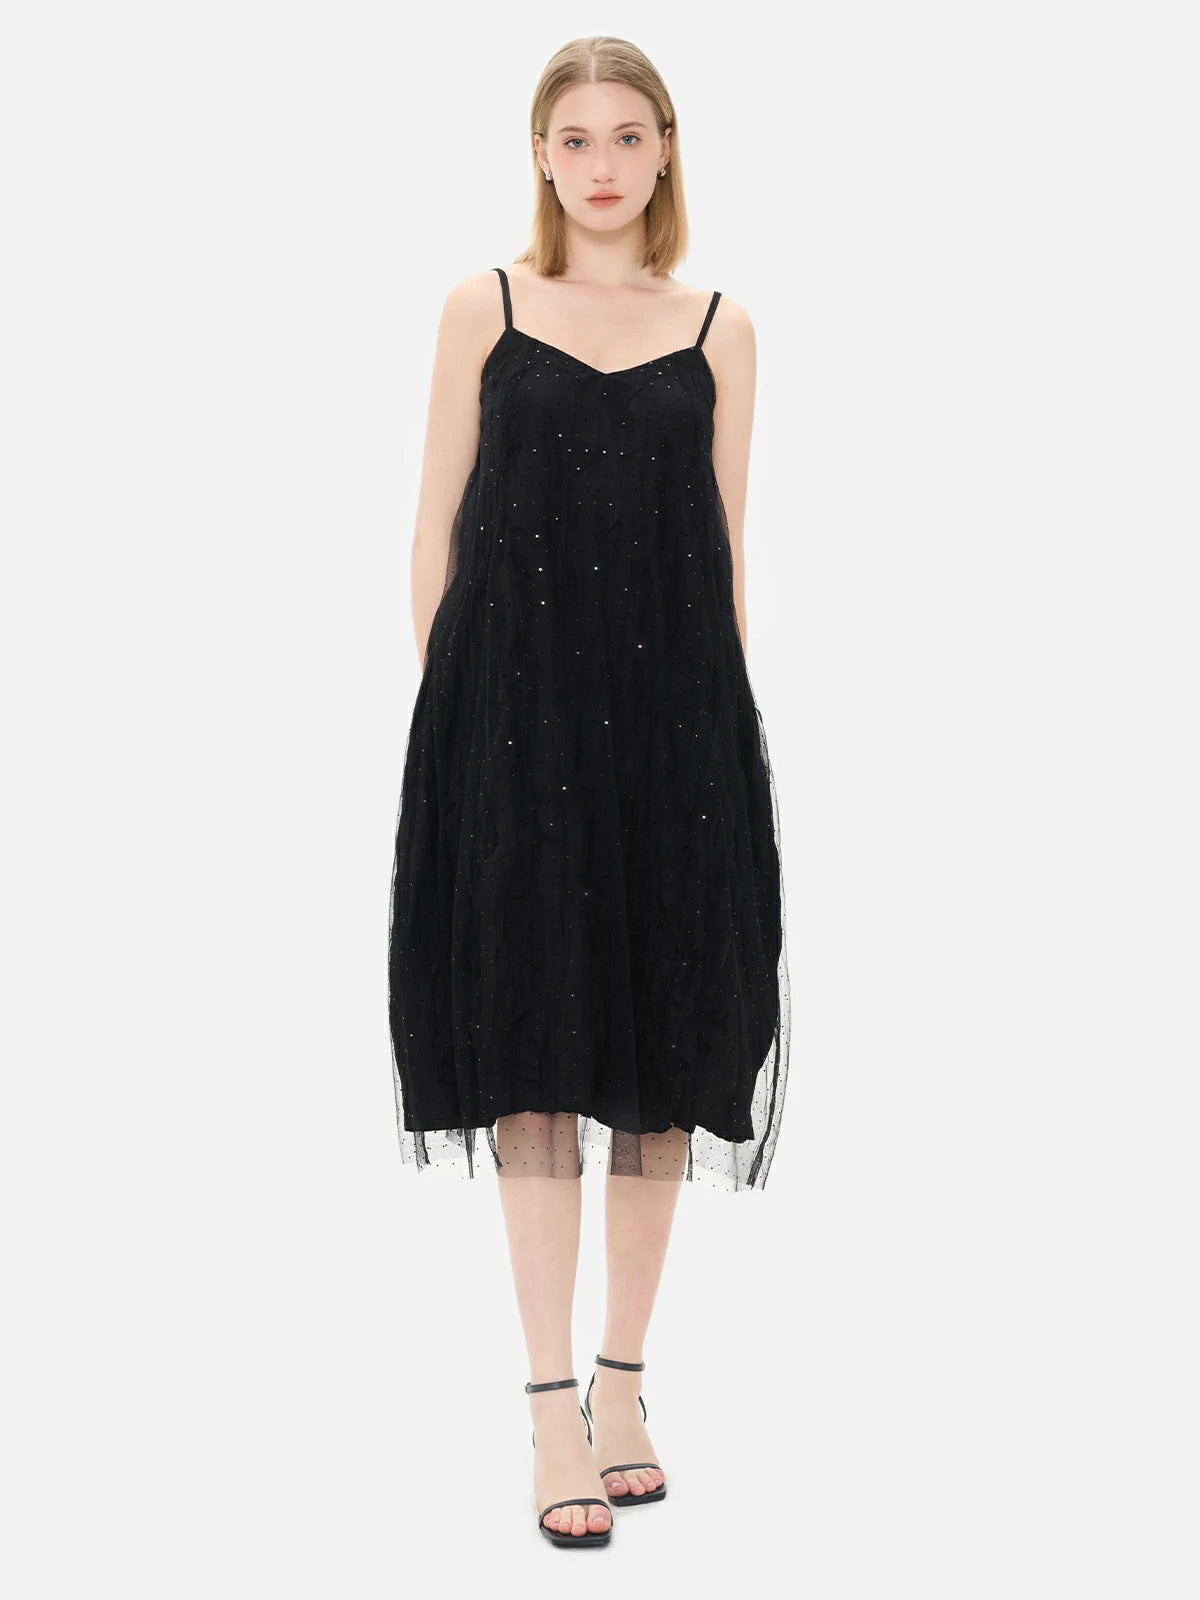 Elegant black V-neck dress with pleated inner lining and sequined mesh overlay